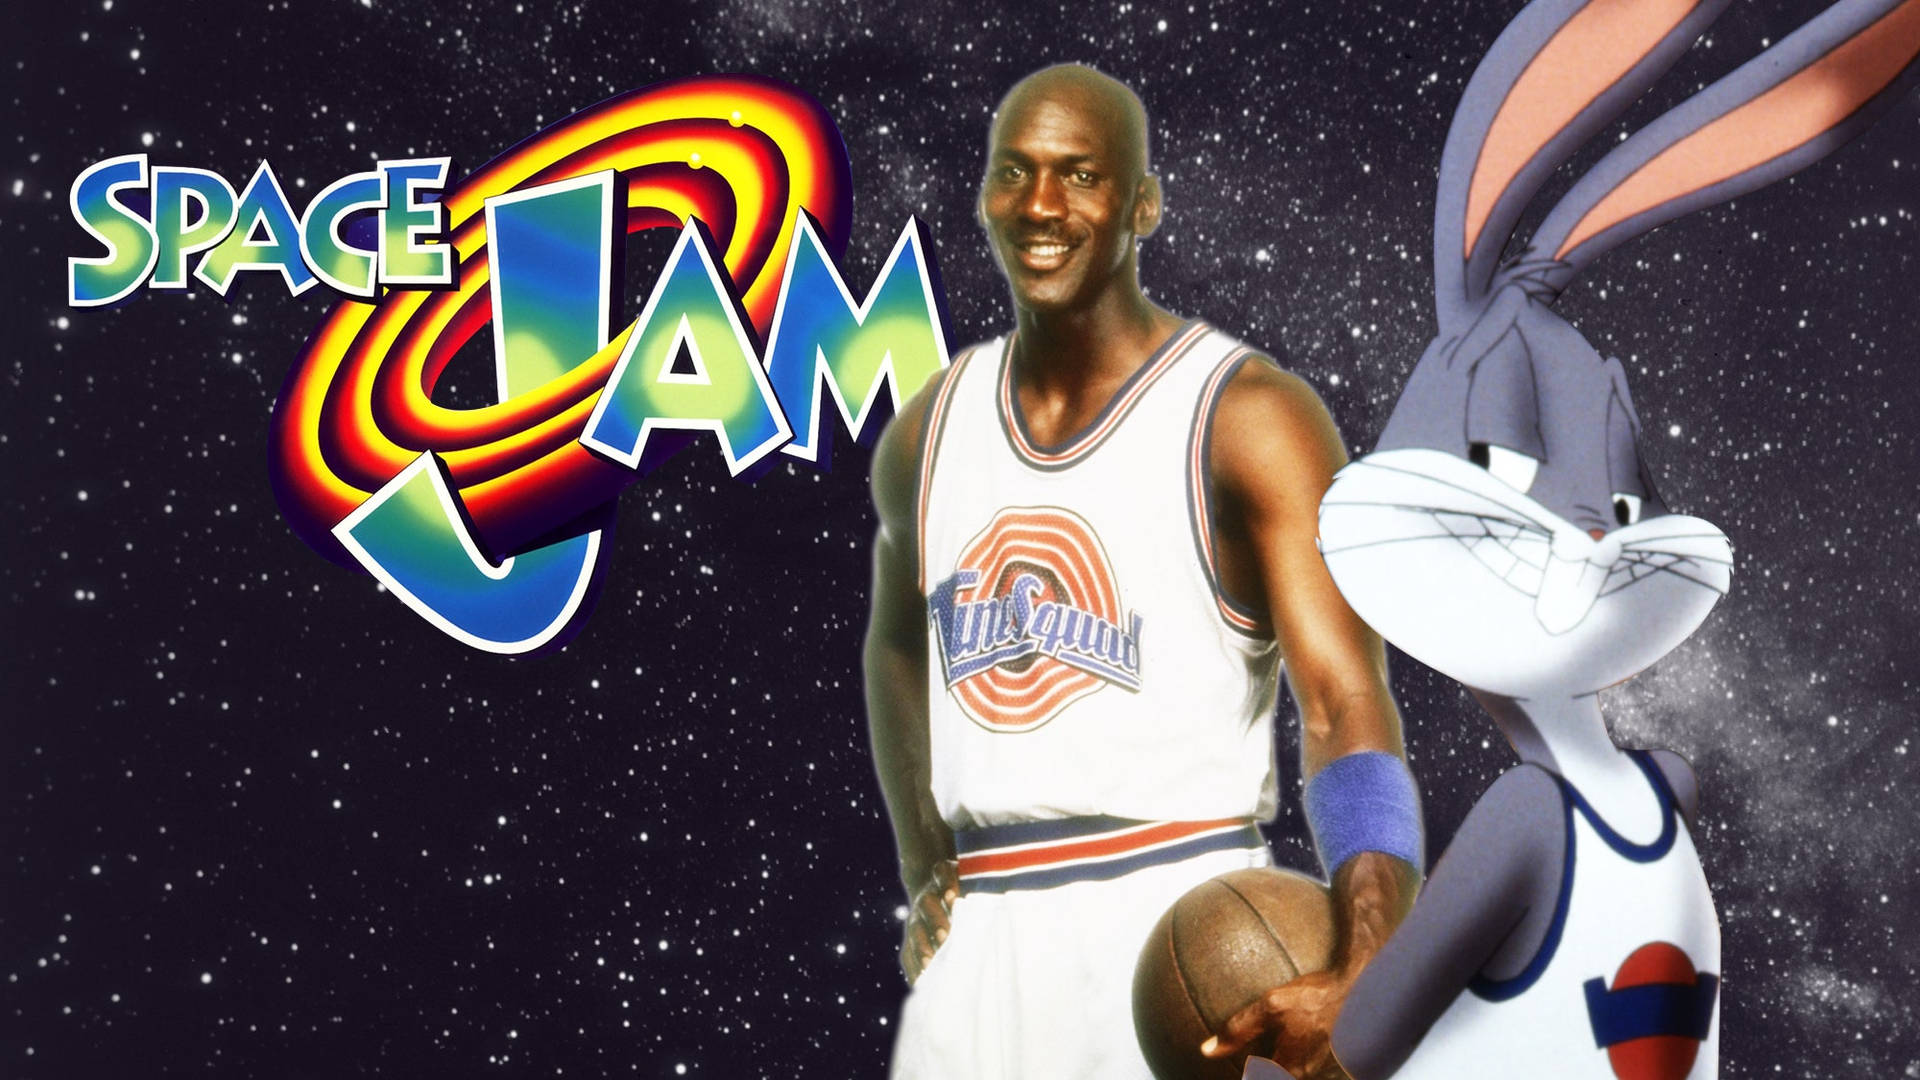 Space Jam 1996 Movie Poster Background